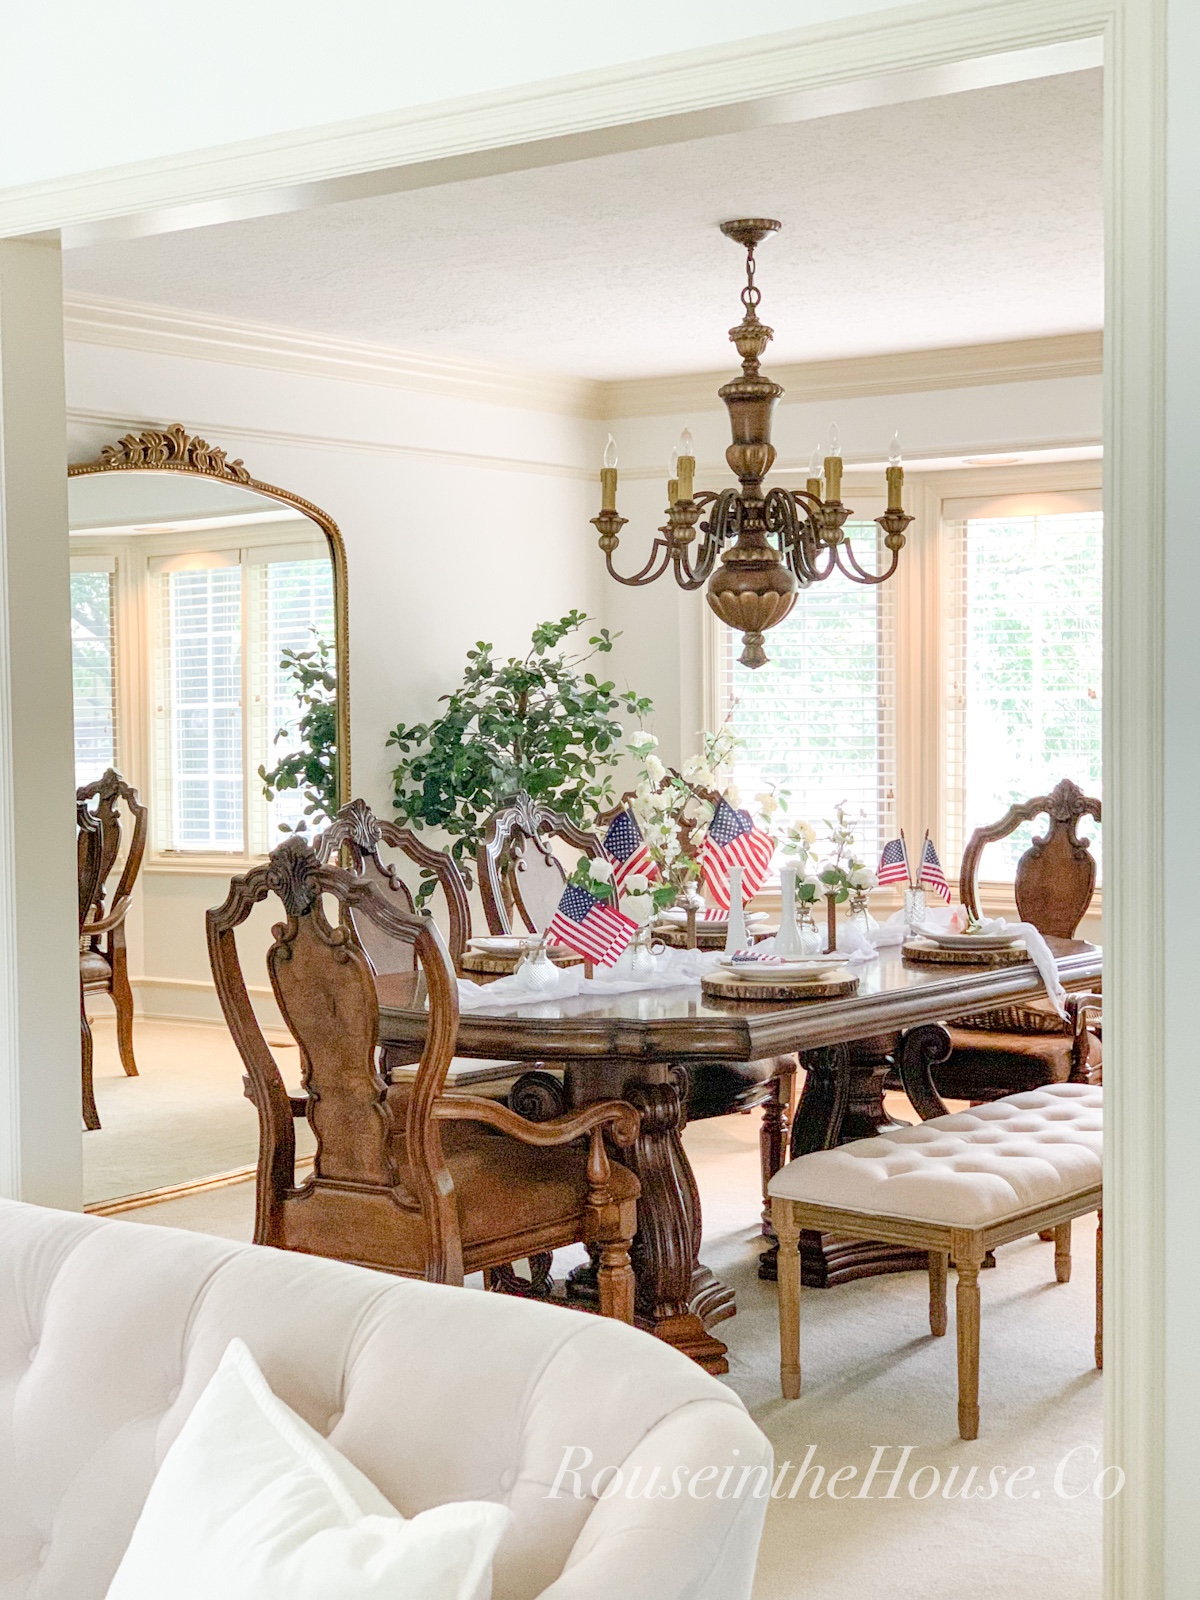 A French Country dining table is set with Americana decor for the 4th of July.